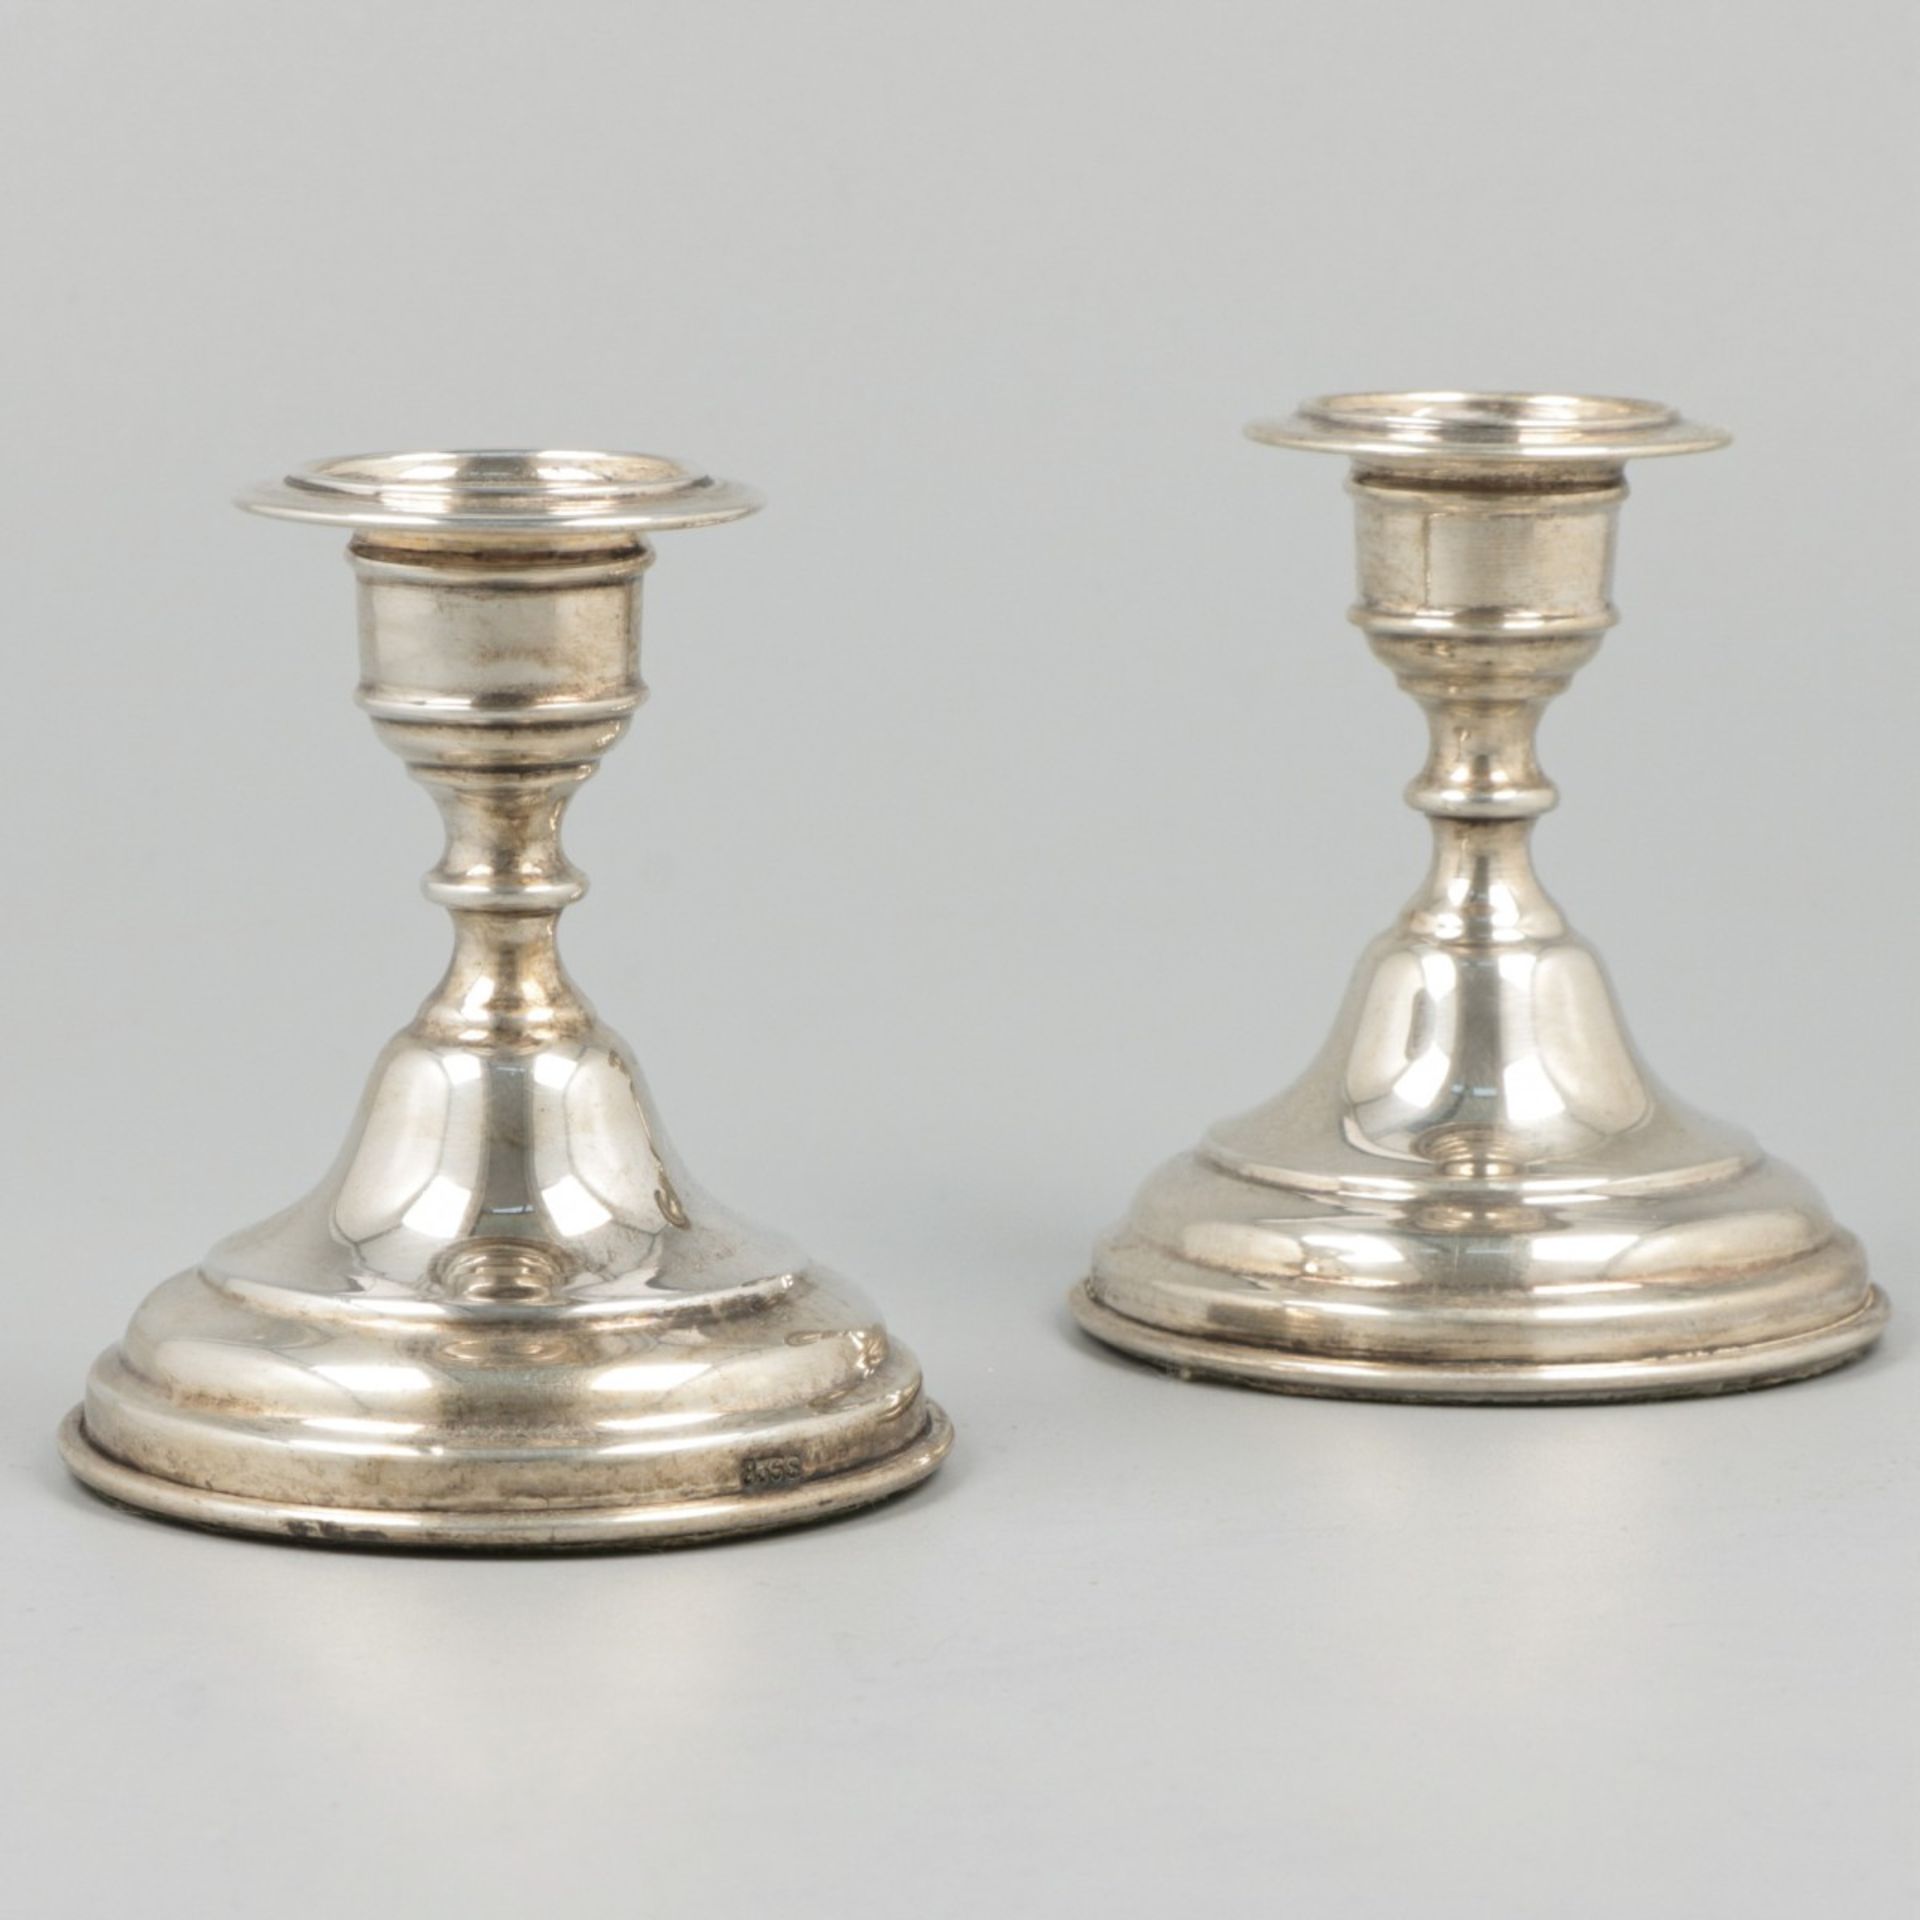 2-piece set of candlesticks silver. - Image 2 of 6